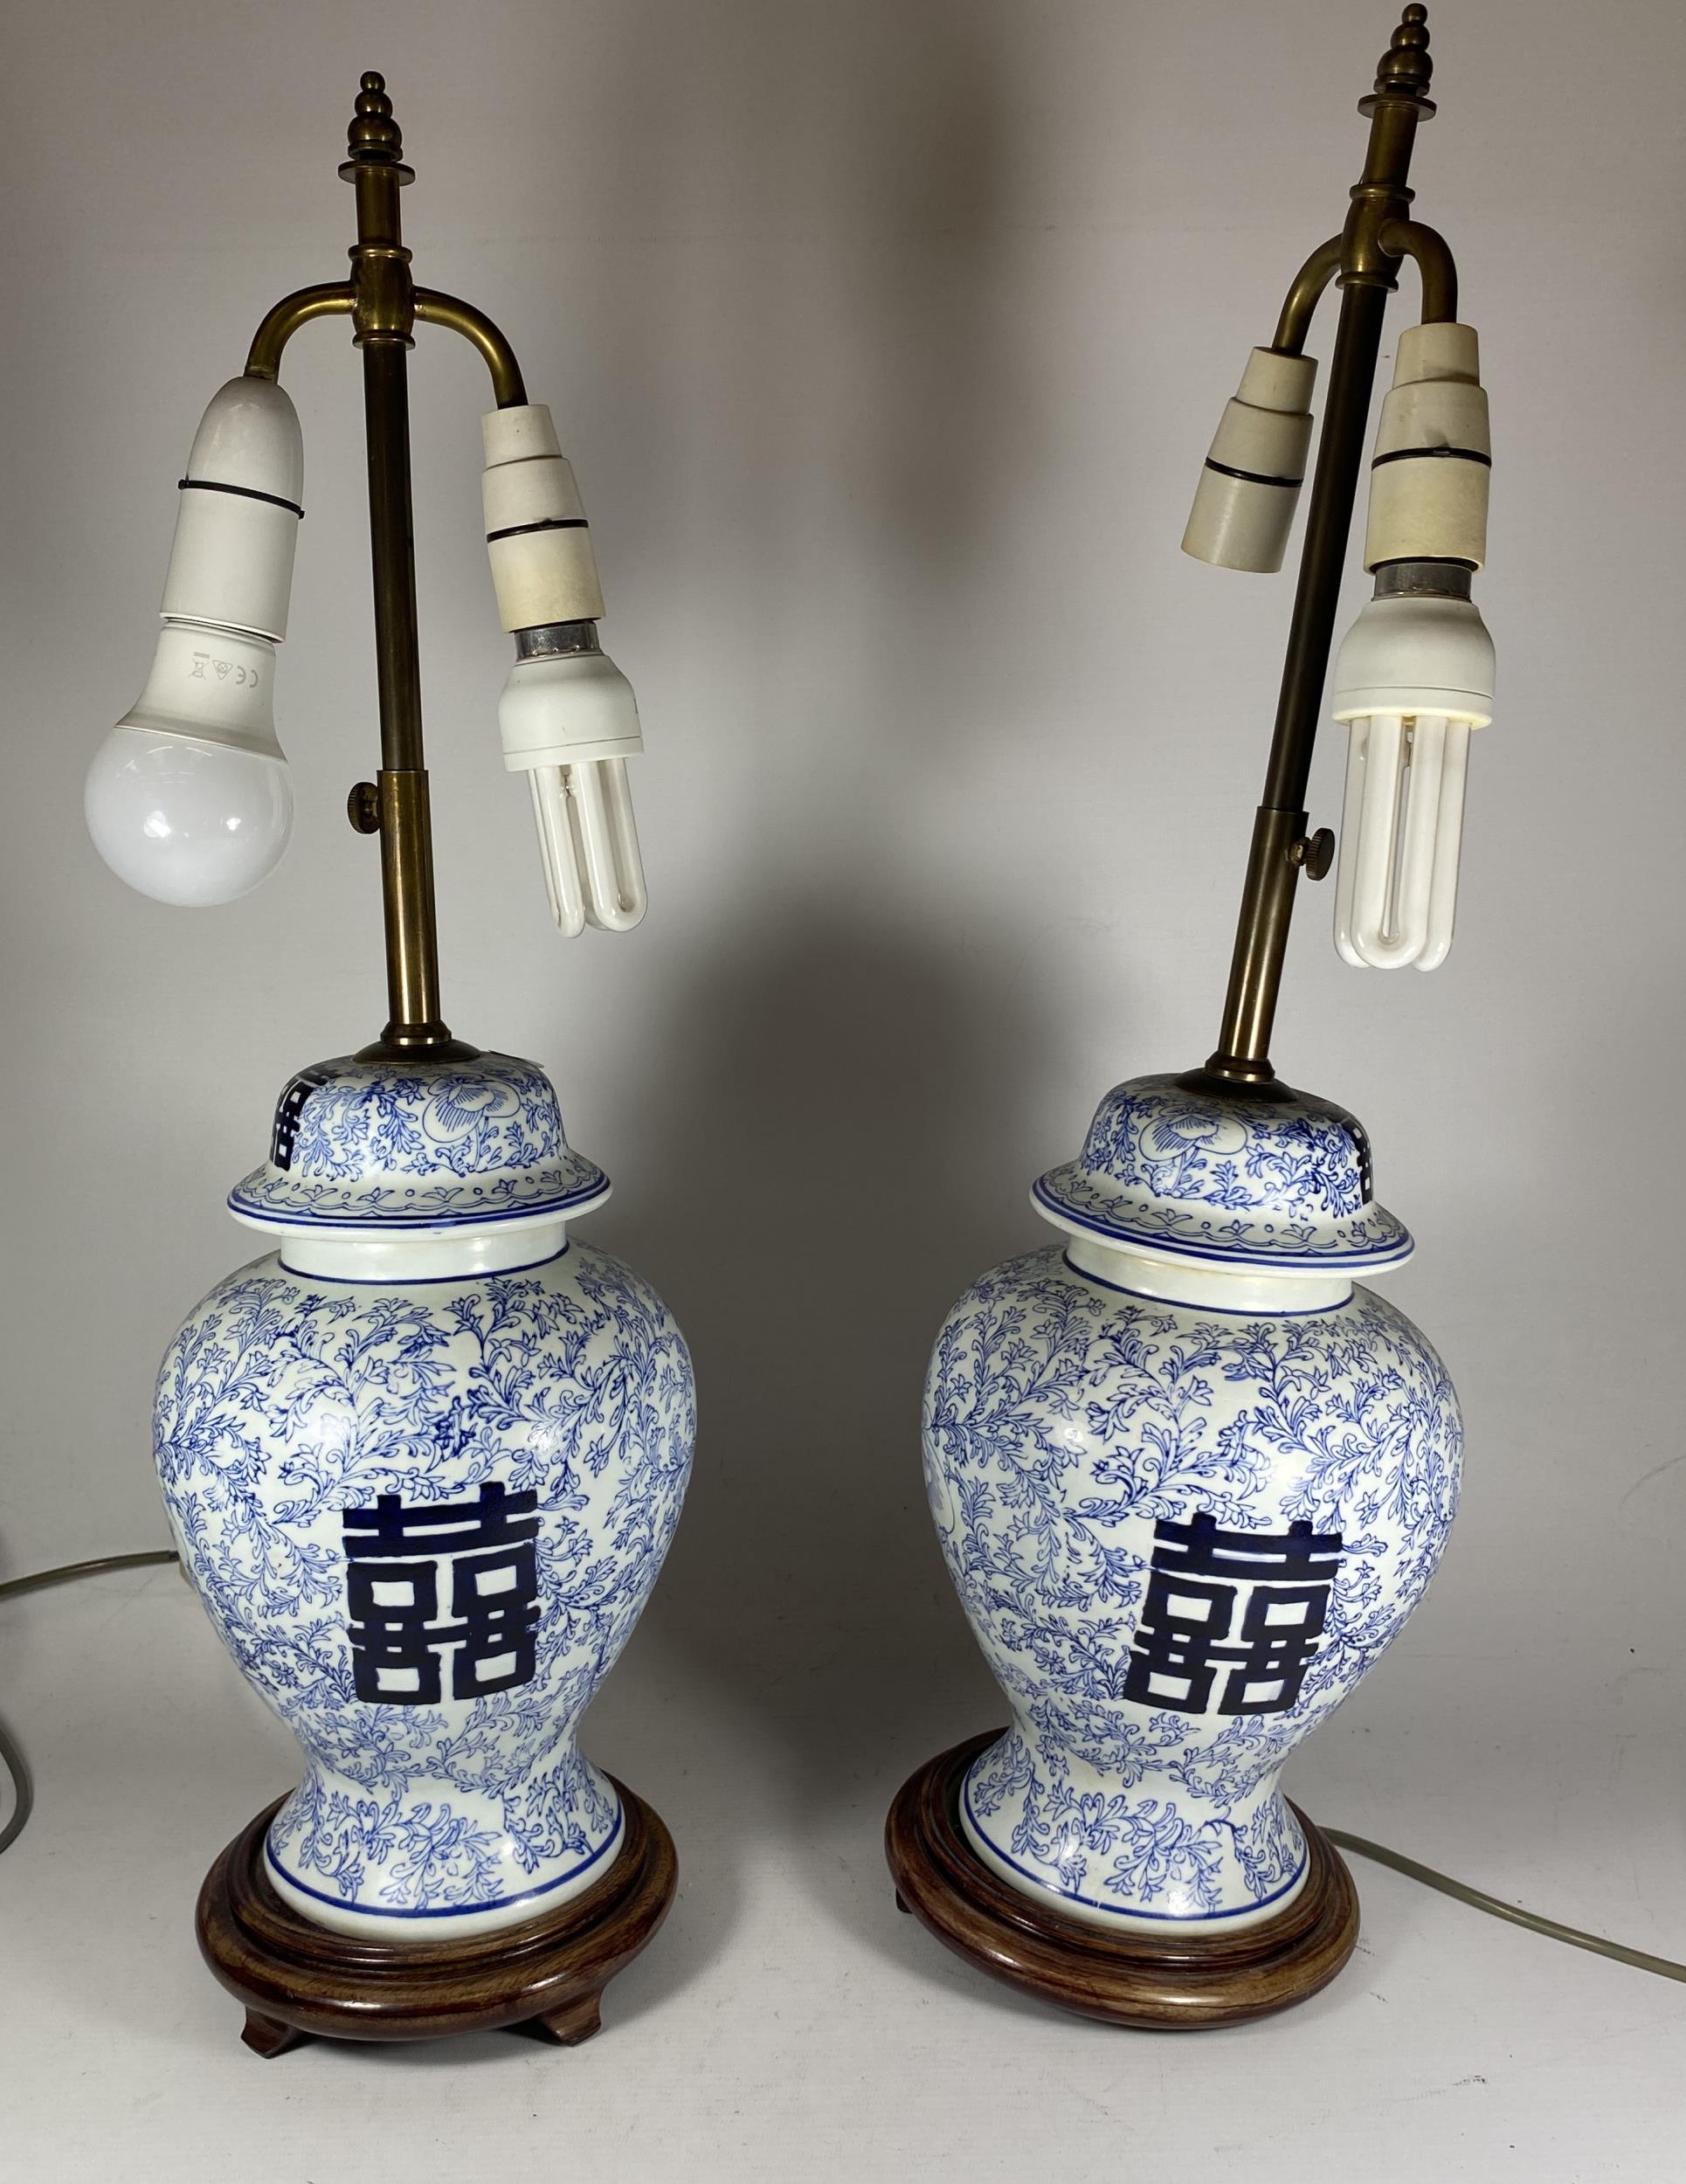 A PAIR OF CHINESE BLUE AND WHITE PORCELAIN MARRIAGE JAR DESIGN TABLE LAMPS, HEIGHT INCLUDING